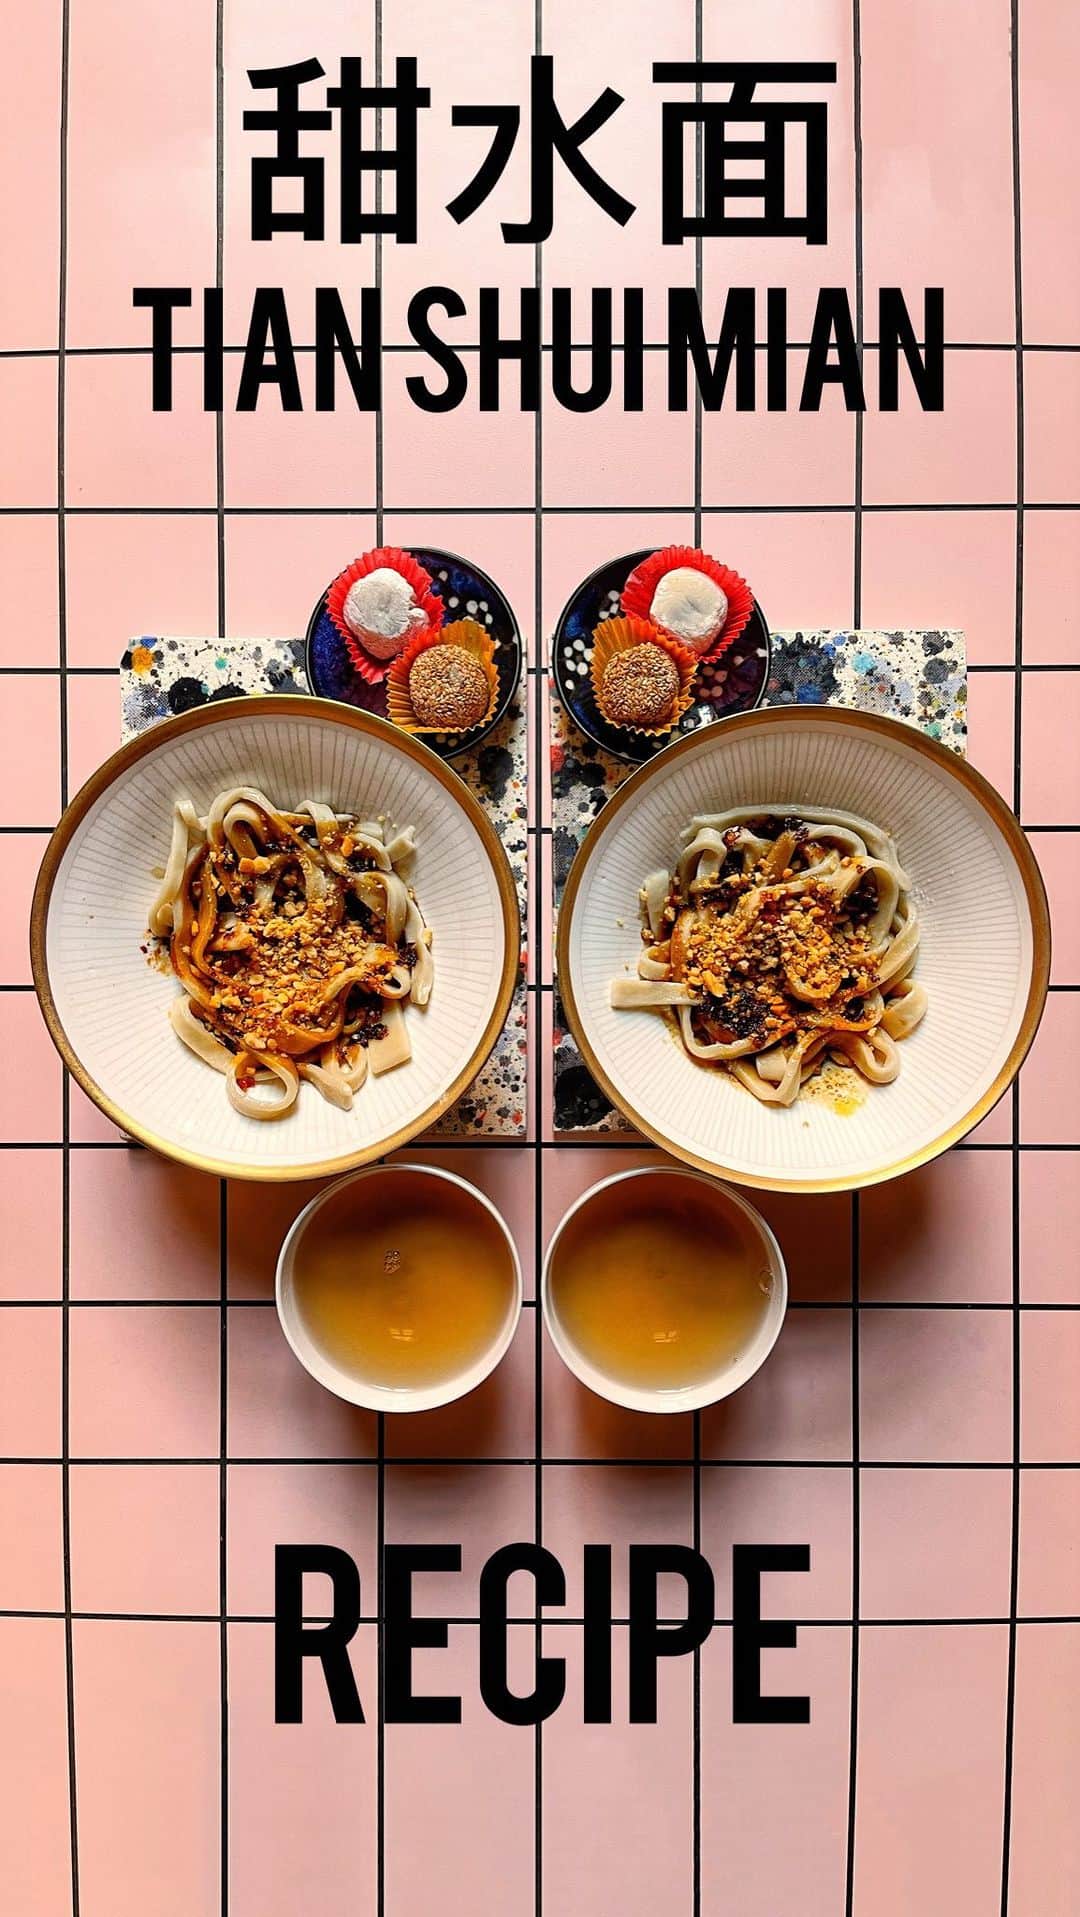 Symmetry Breakfastのインスタグラム：「甜水面 Tian Shui Mian, or sweet water noodles. They’re a classic of Sichuan cooking, thick chewy noodles with a rich sweet soy sauce with a hit of spice. You’ll need to also make a 复制酱油 fuzhi jiangyou, a infused and sweetened soy sauce that keeps in the fridge for about a month and has so many uses from tofu to salads.   The recipe will be going up on my Substack newsletter later, so if you’re not subscribed to that tap the link in my bio! It’s free too ❤️ But this weekend I’m in Venice for the Redentore so it might be Monday before it lands in your inbox! Have a good one 😘 #symmetrybreakfast」